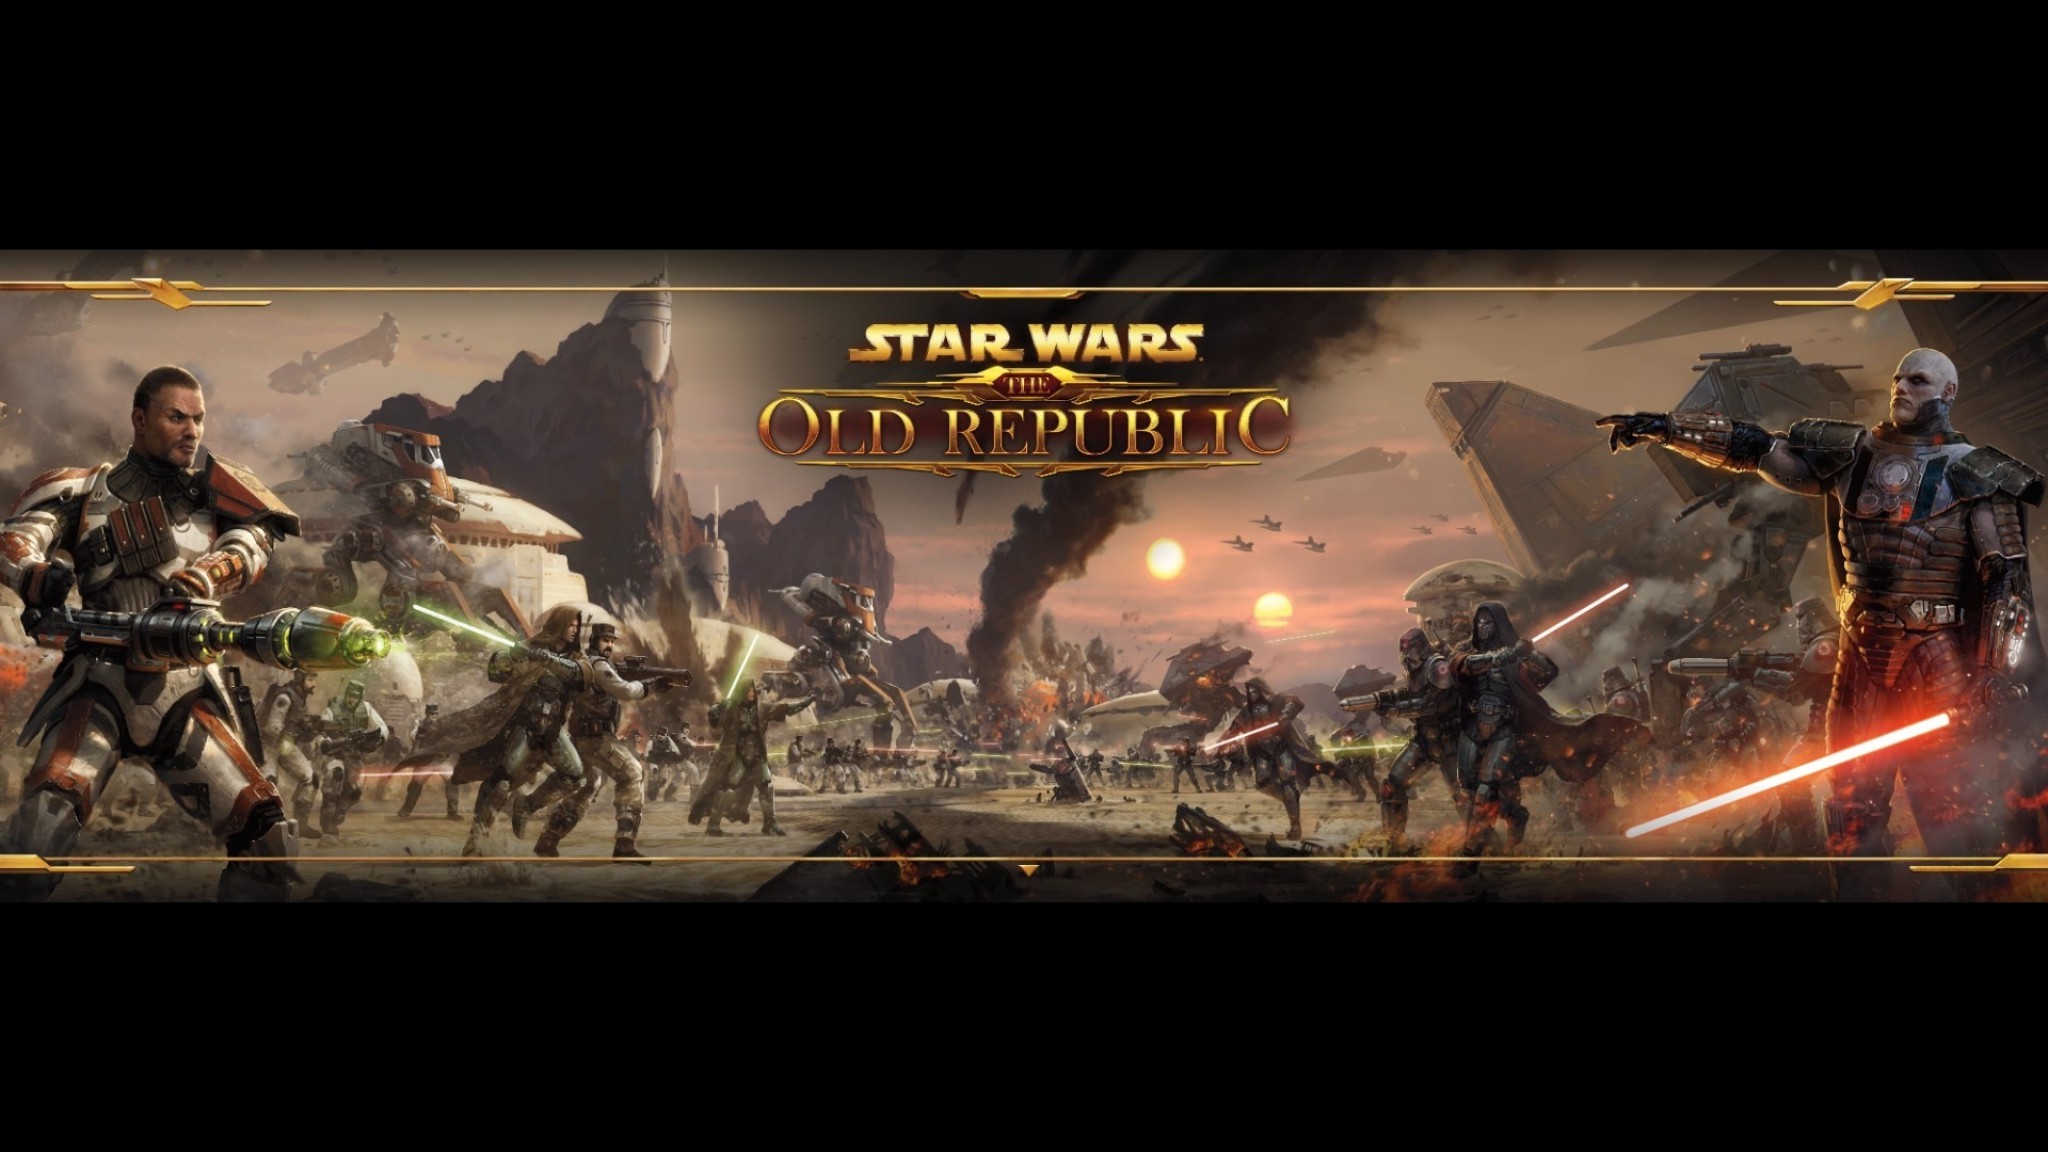 Star Wars The Old Republic Dual Monitor Wallpaper 2048×1152